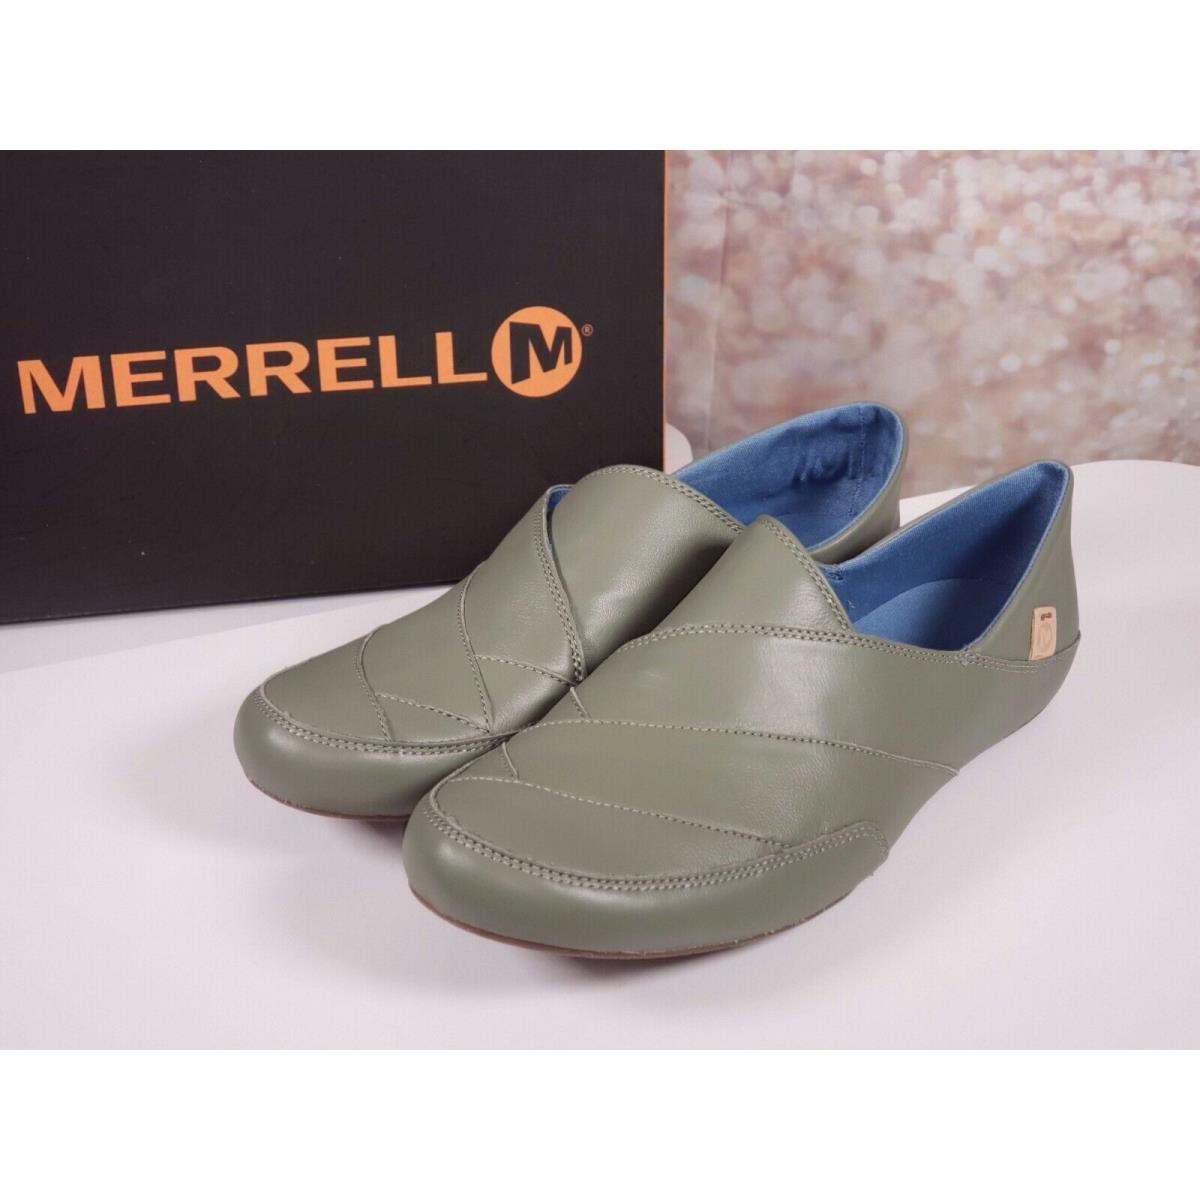 Merrell - Leather Slip-on Shoes Inde Lave - Vertiver - Select Size 7 or 10